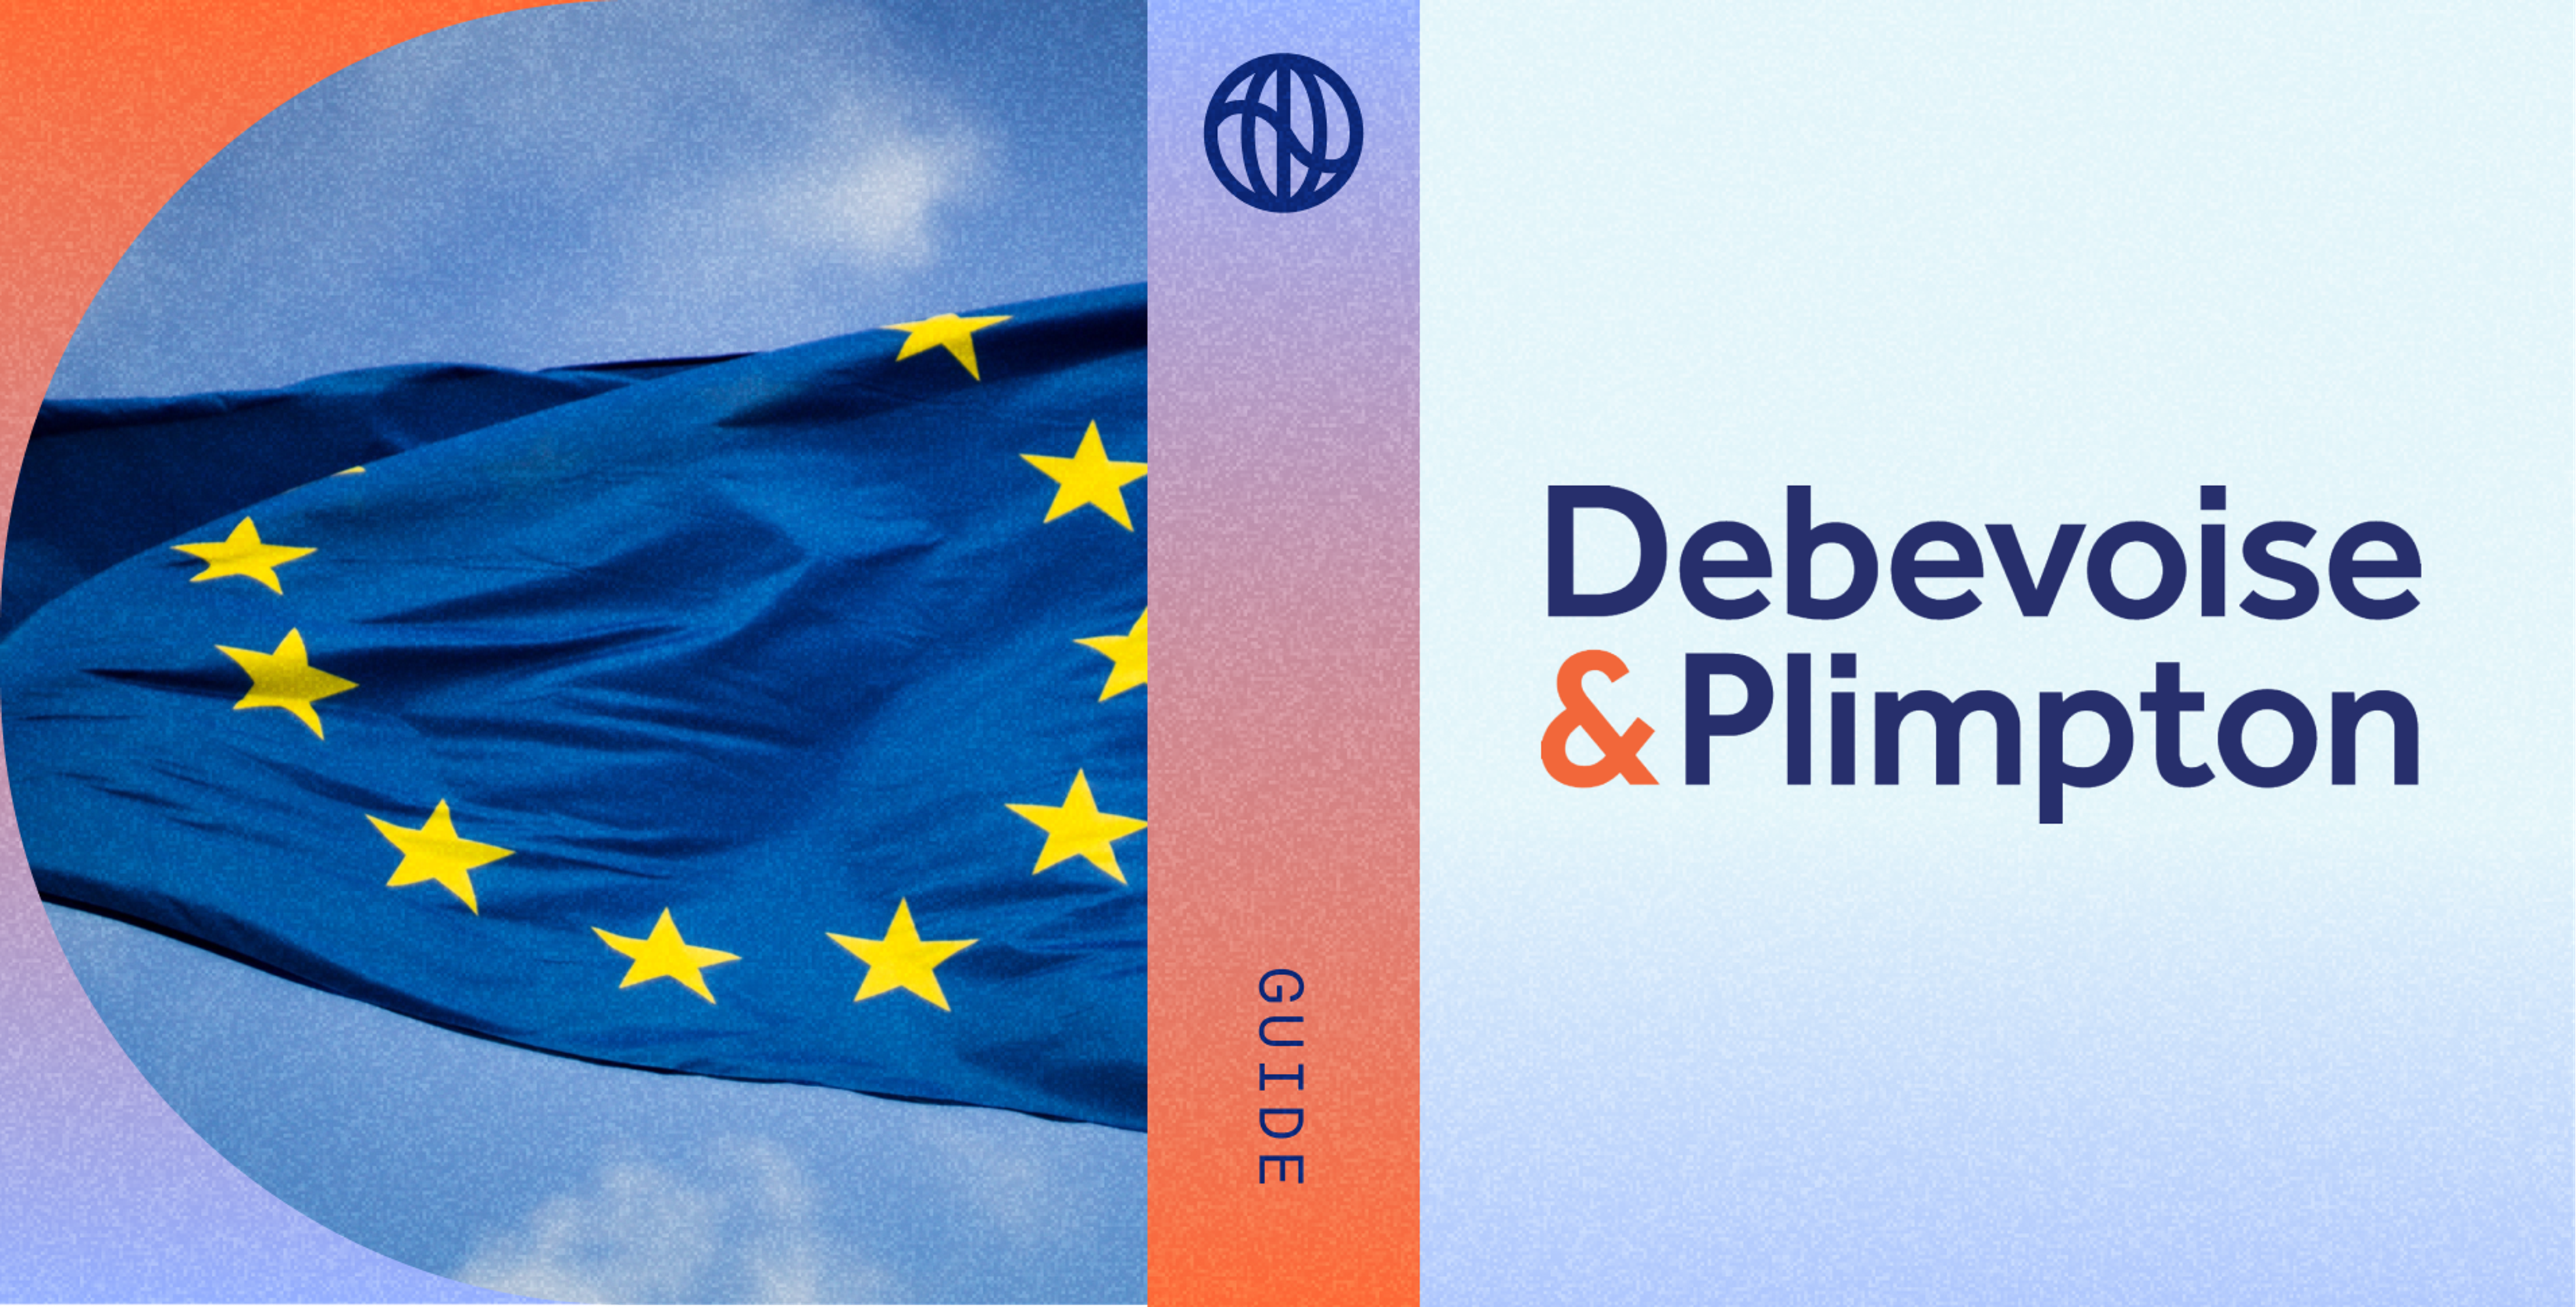 Debevoise and Plimpton law firm logo next to an EU flag 